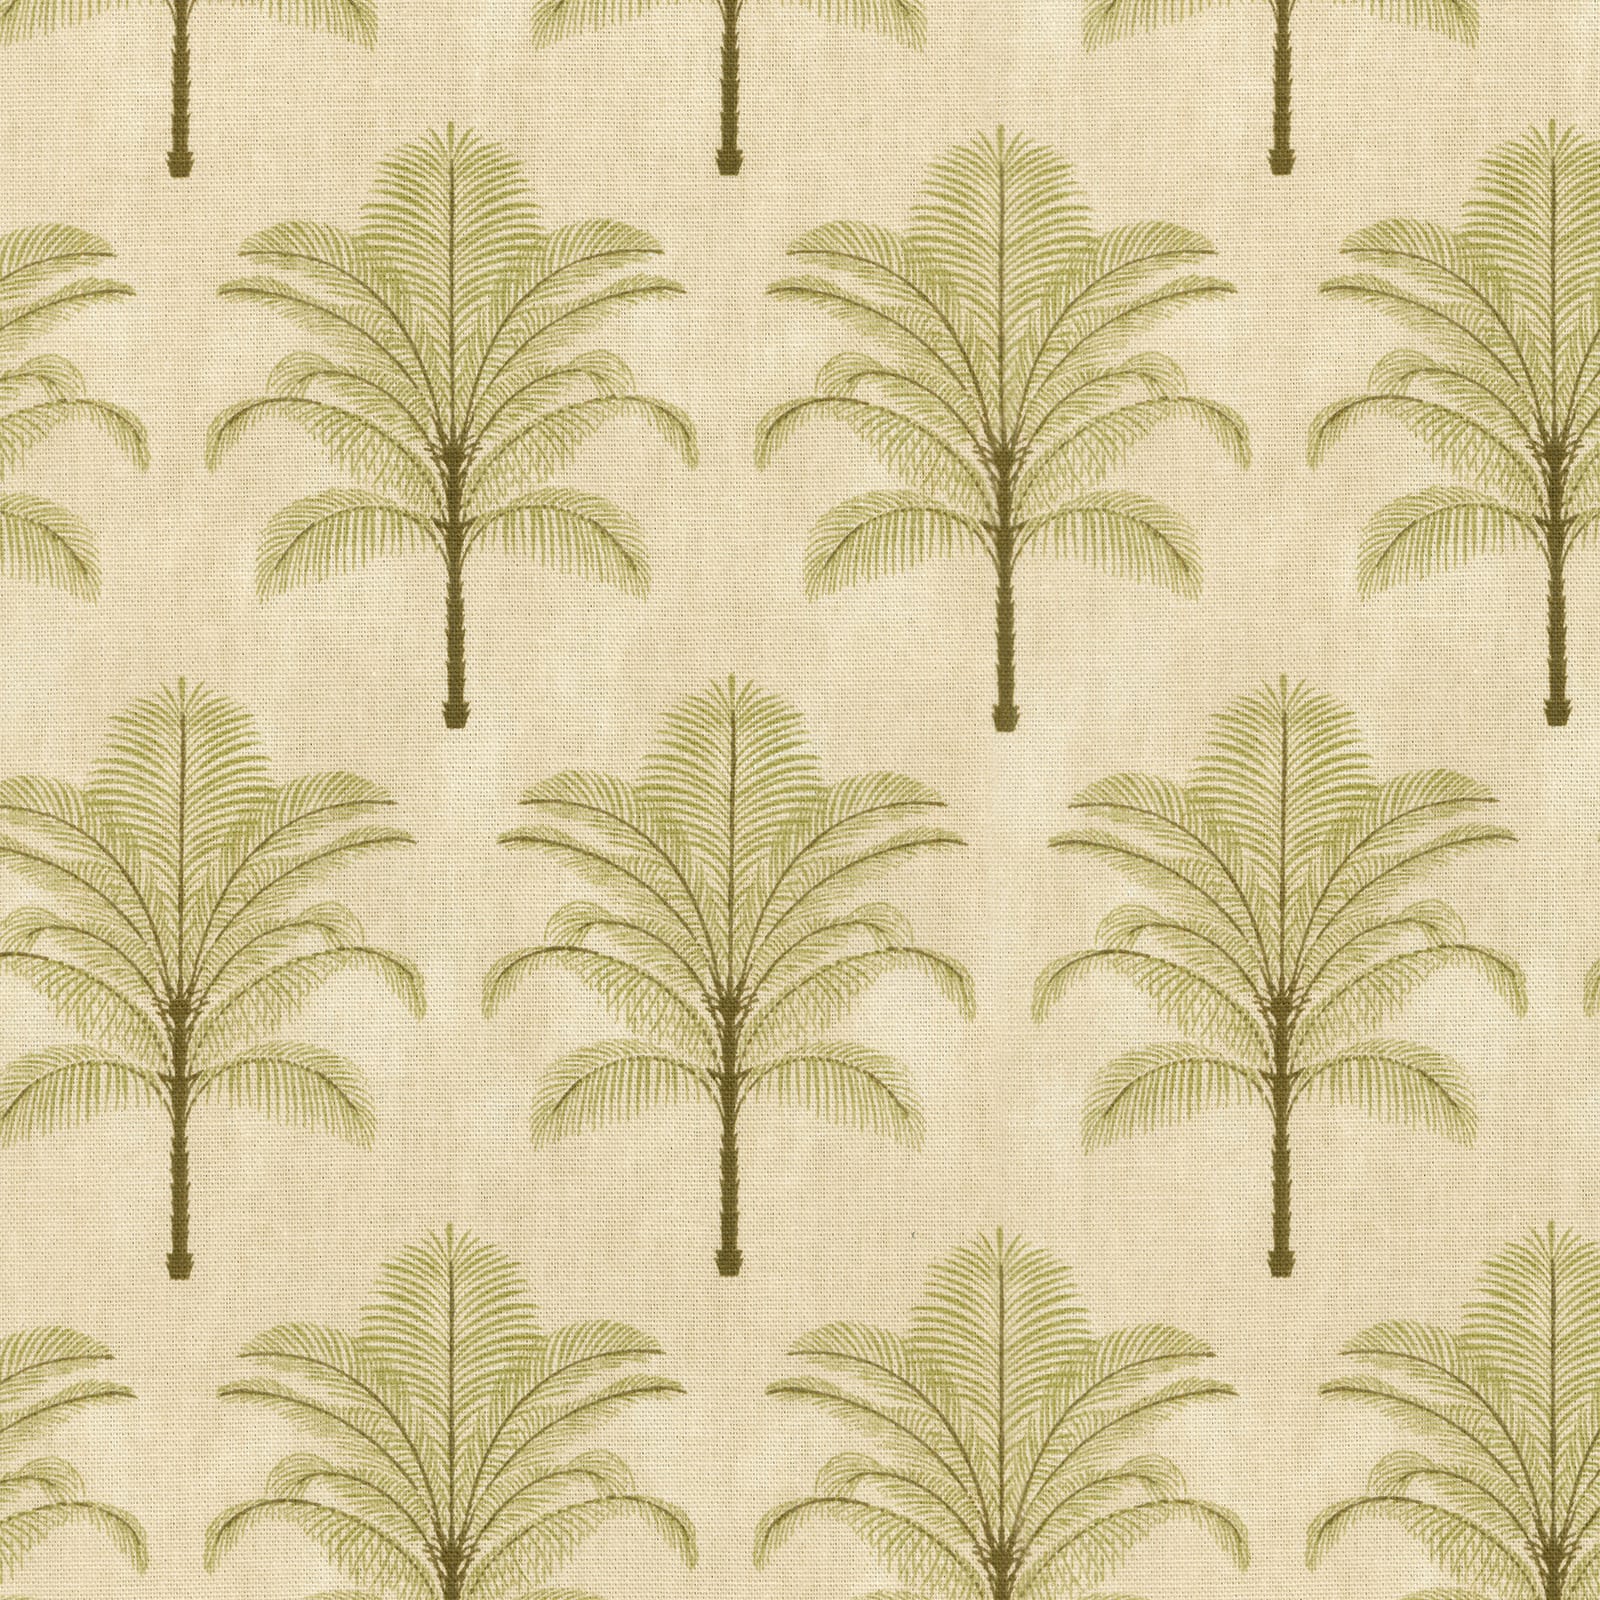 Find The Tommy Bahama Home Palm Life Aloe Home Decor Fabric At